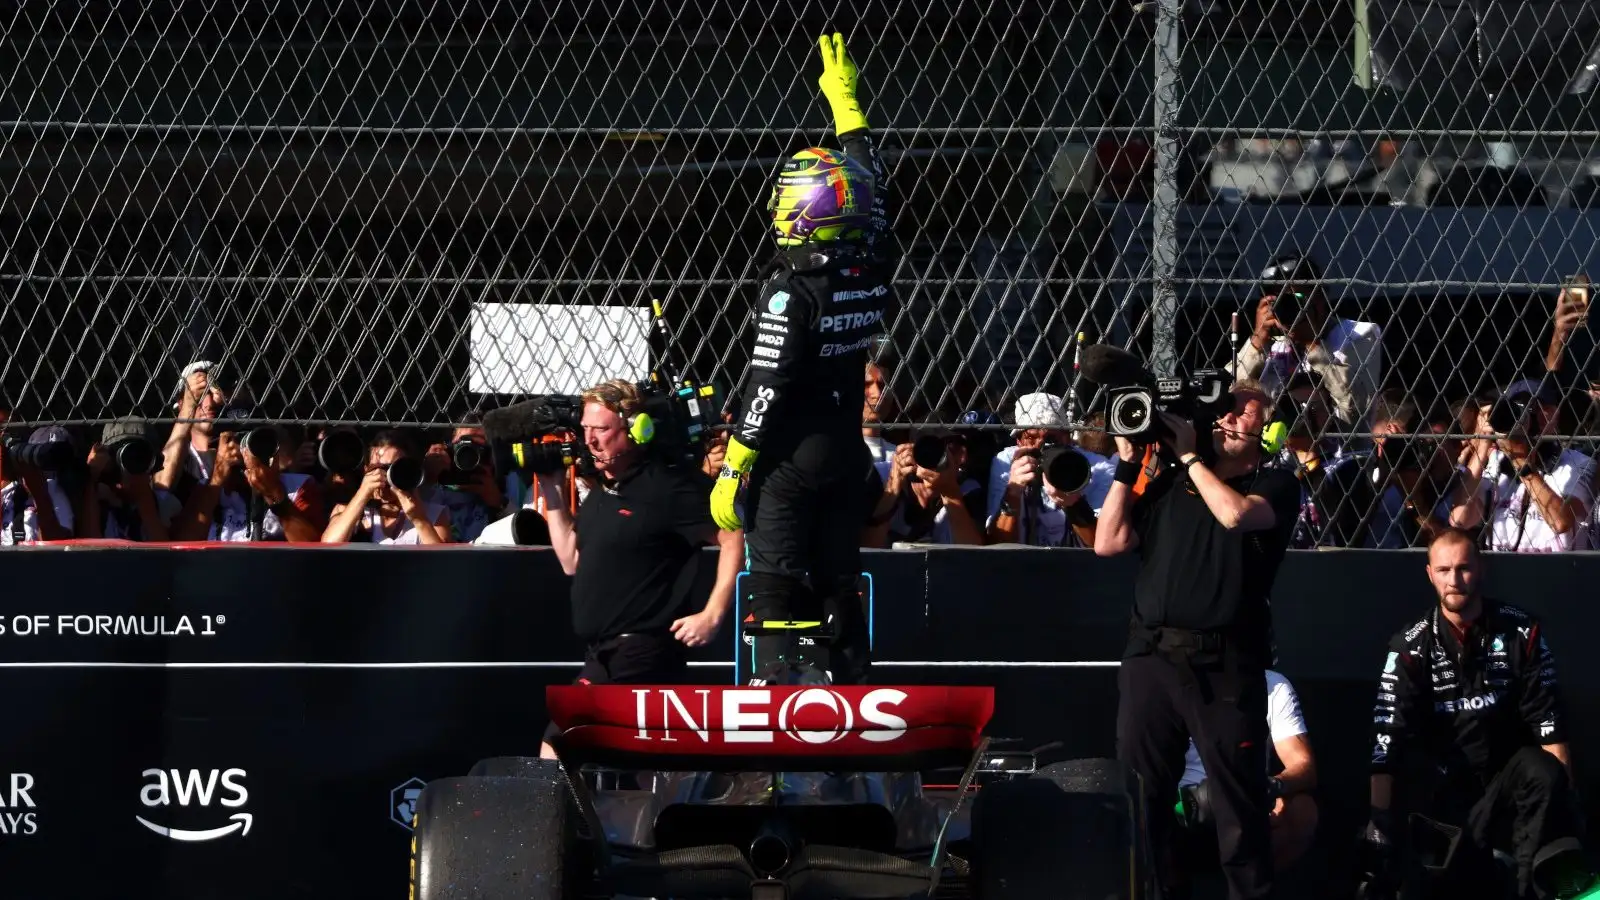 Mercedes driver Lewis Hamilton celebrates his runner-up result at the Mexican Grand Prix.